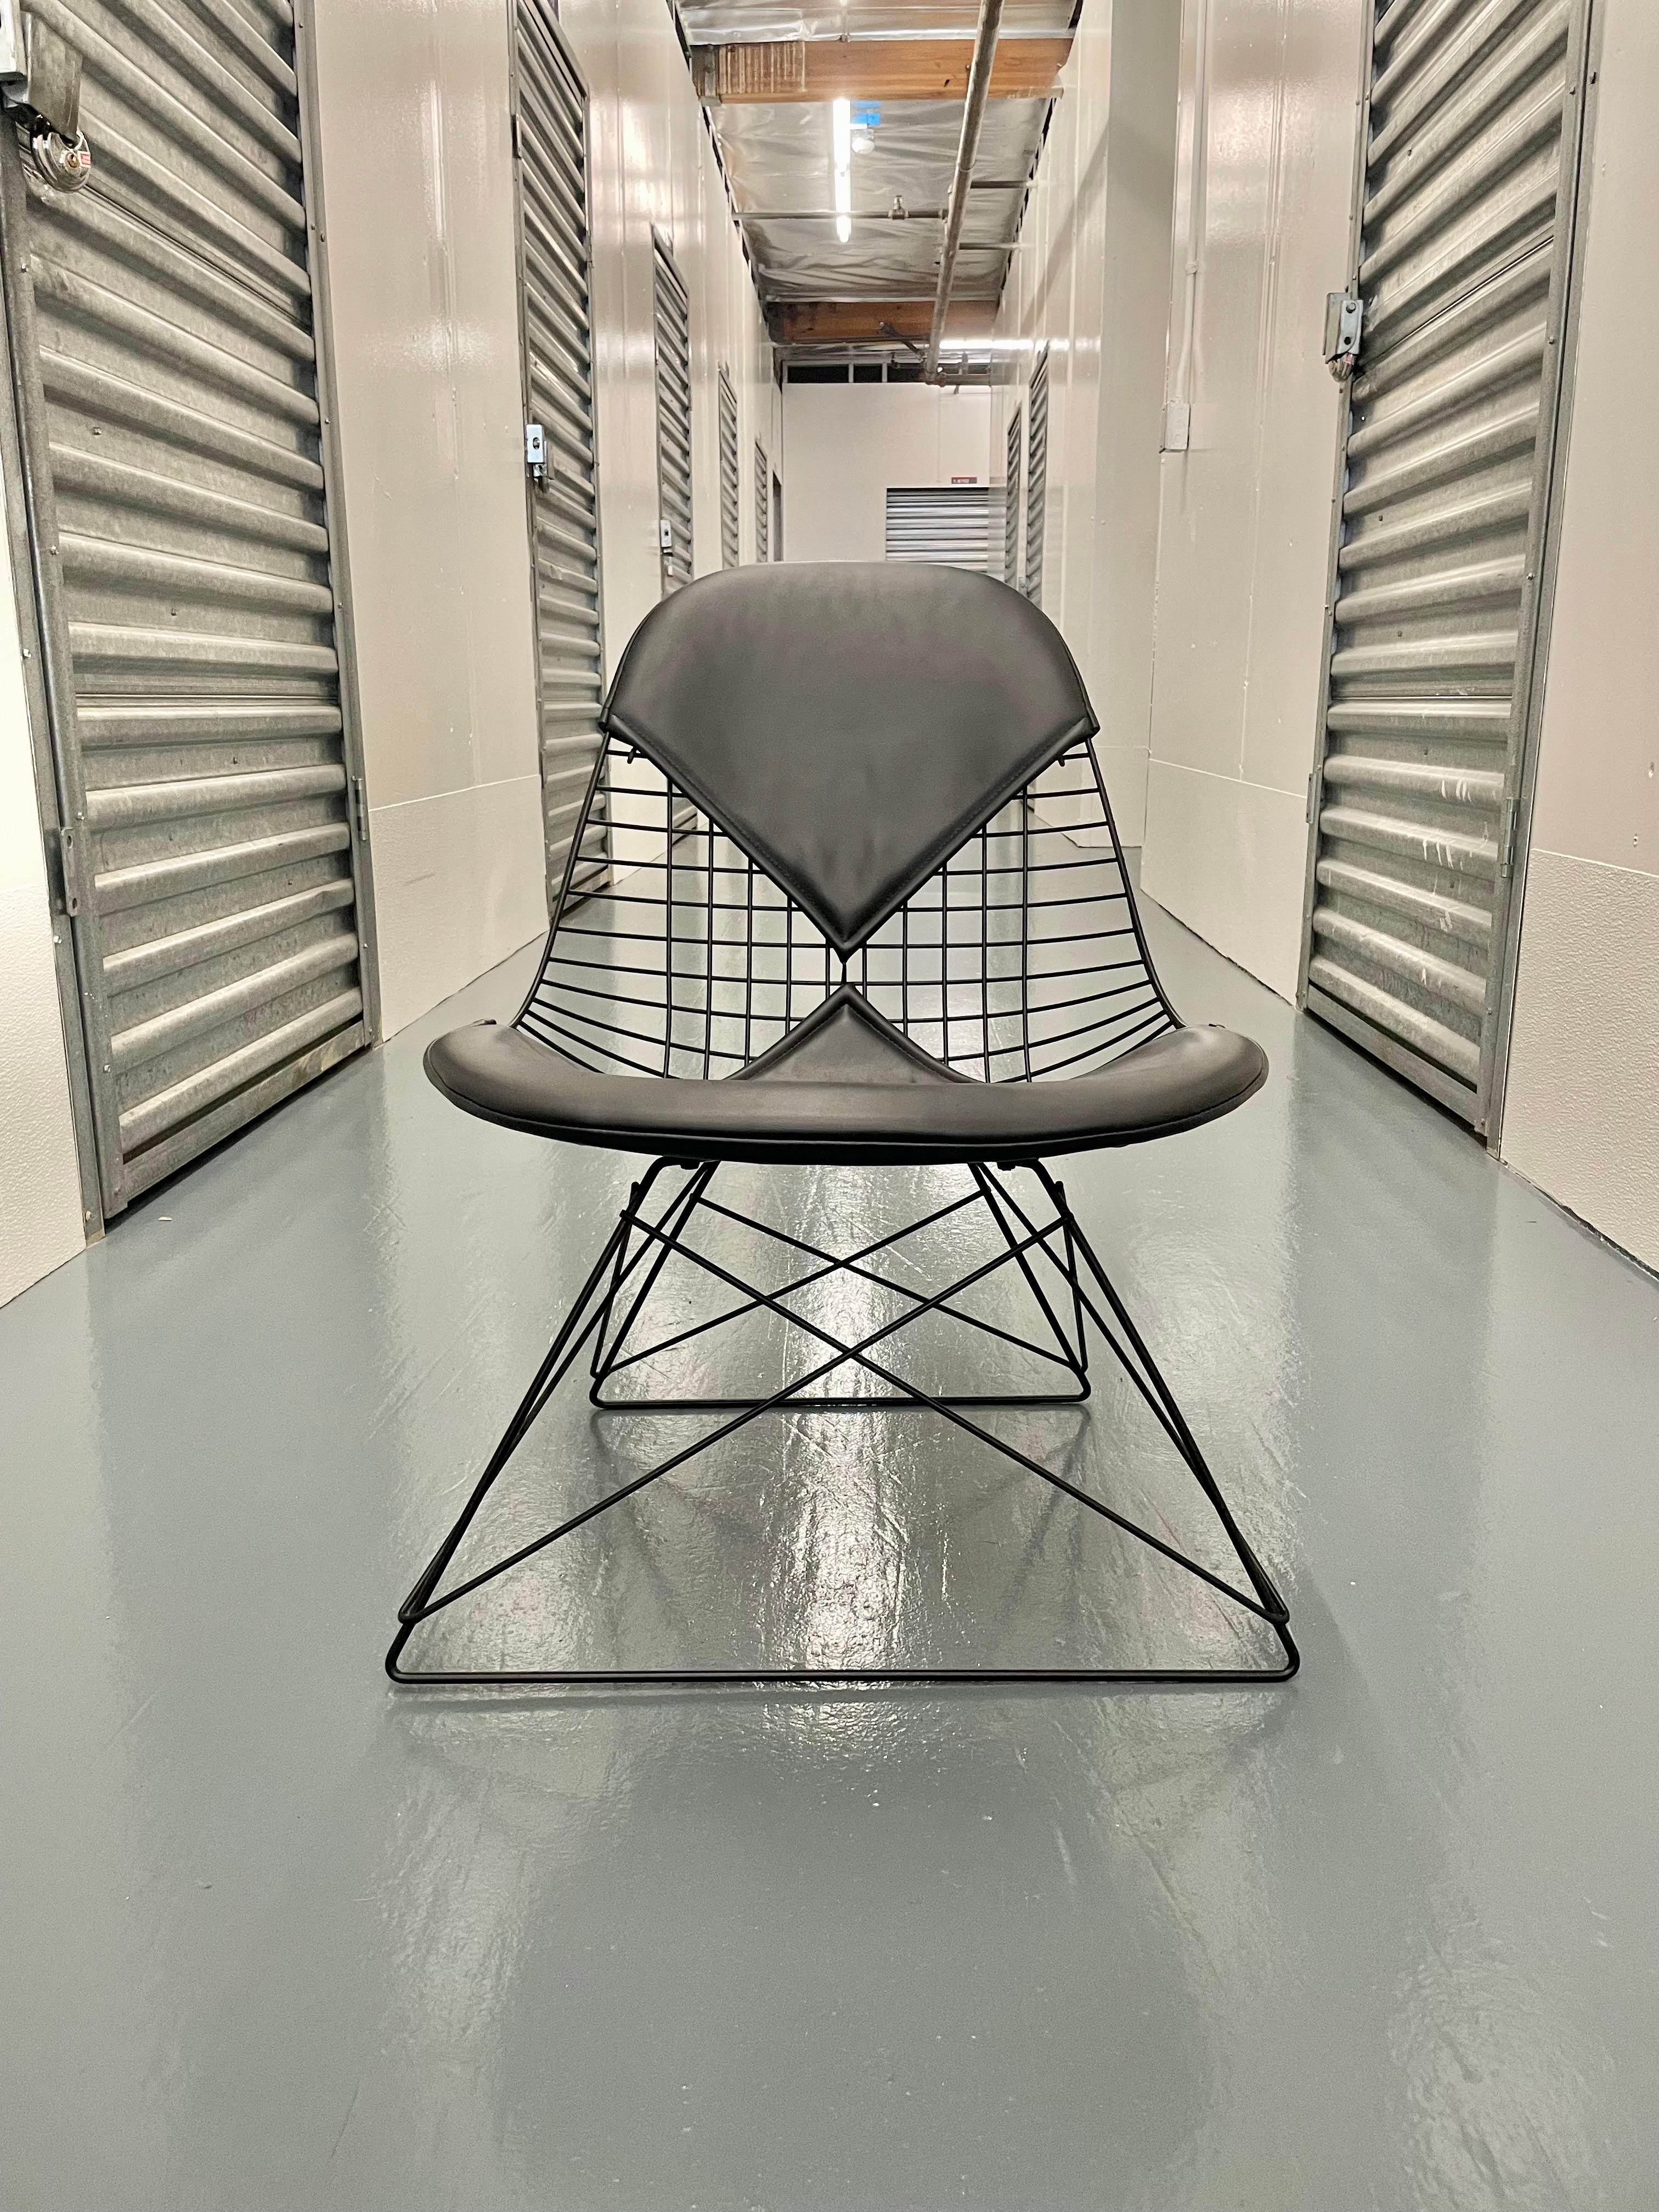 Rare Eames LKR style low Bikini lounge chair

The Eames LKR 'Cats Cradle' Wire side chair or abbreviated Low (L) Height, K-Wire (K) Chair on Rod (R) Base, also known as the ‘Cats Cradle’, was one of most memorable and unusual designs. This wire